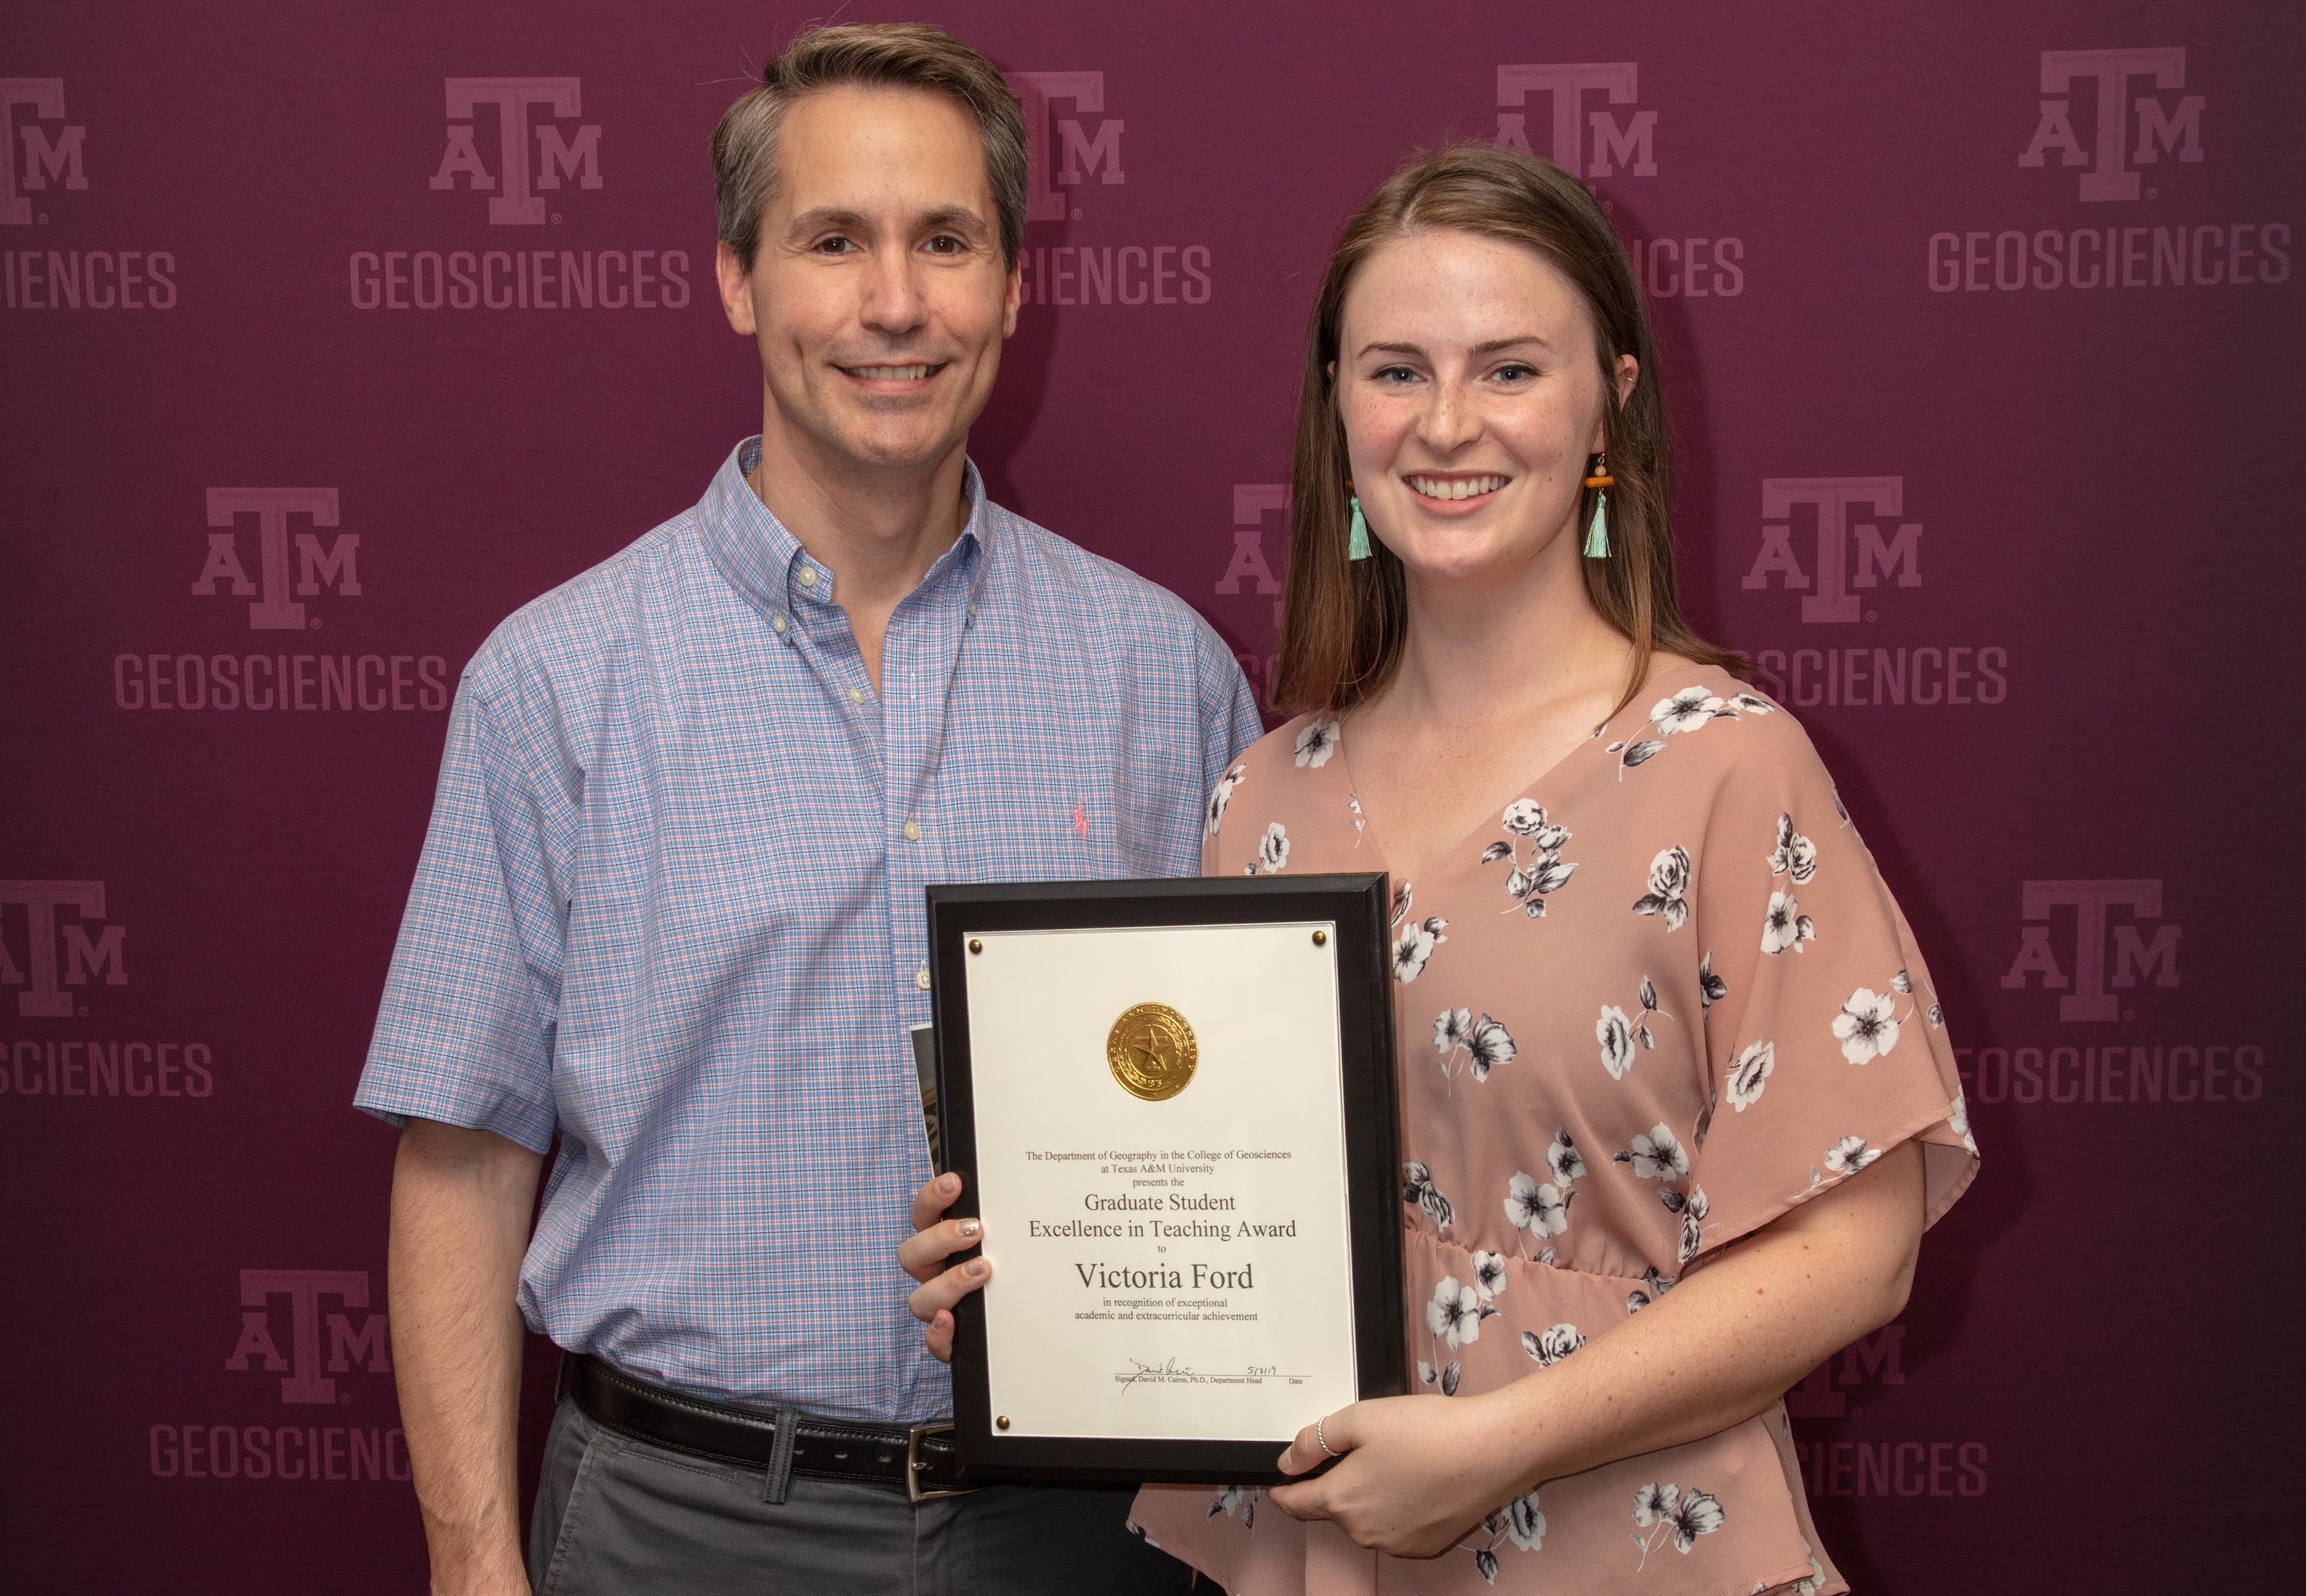 Dr. Frauenfeld and Victoria Ford at the 2019 graduation reception